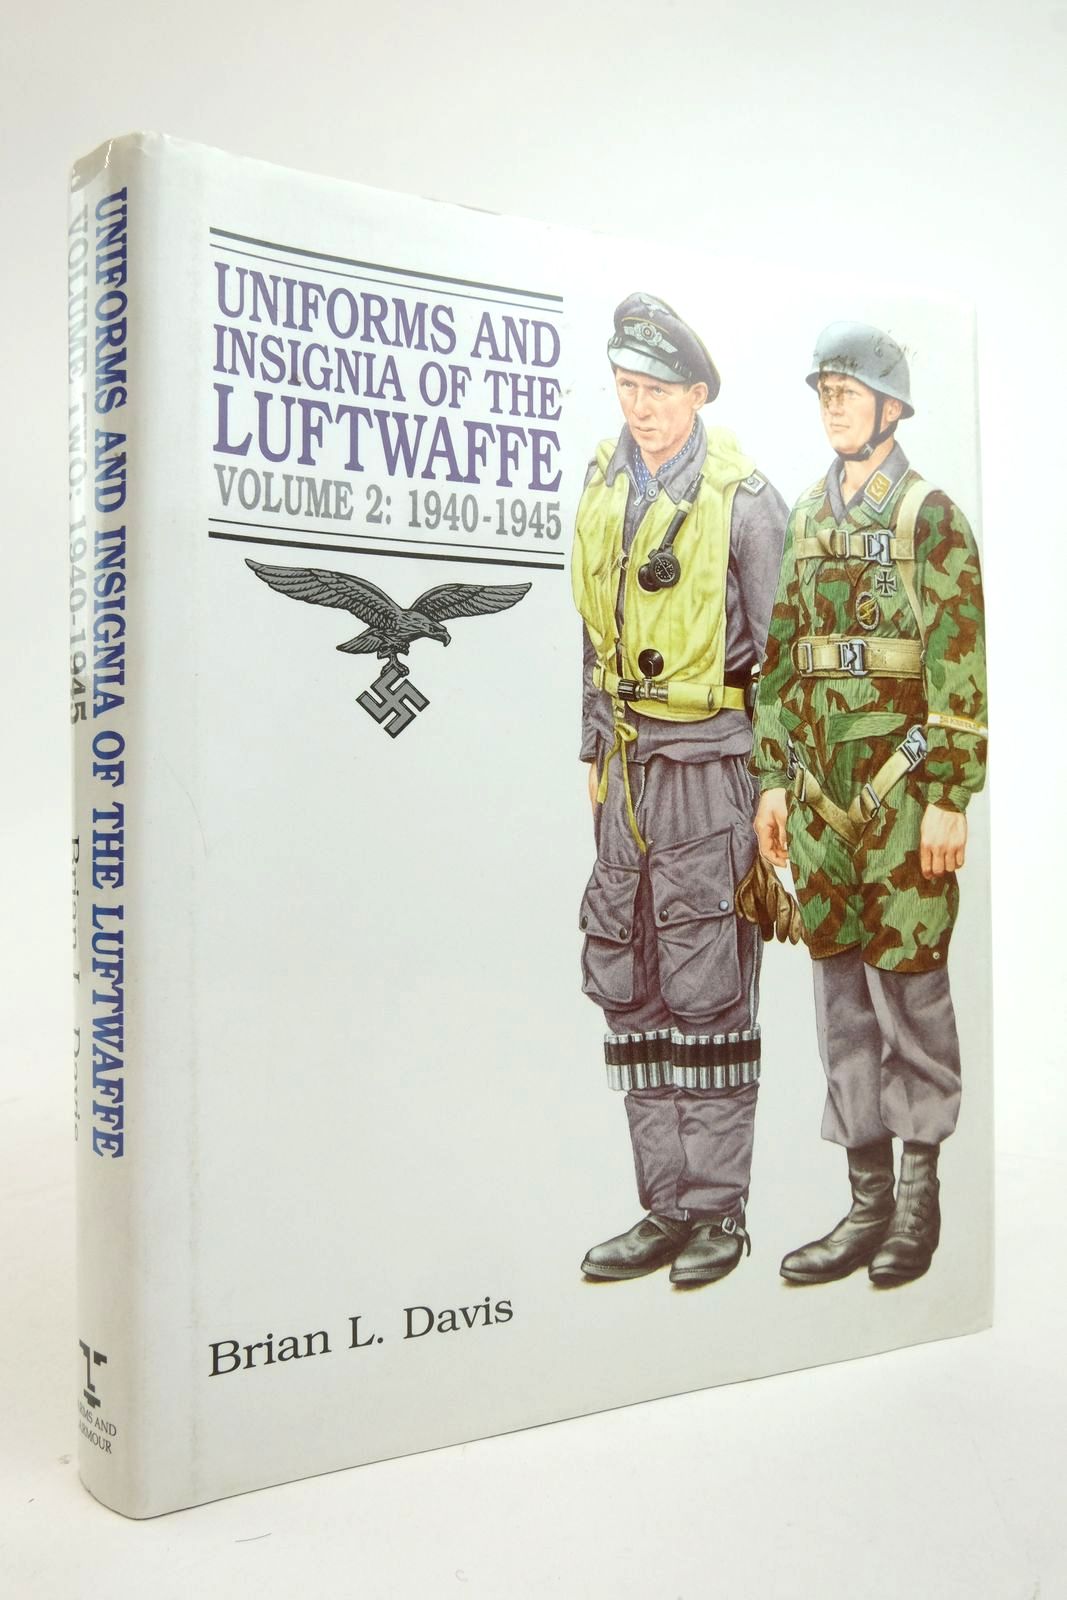 Photo of UNIFORMS AND INSIGNIA OF THE LUFTWAFFE VOLUME 2: 1940-1945 written by Davis, Brian L. published by Arms & Armour Press (STOCK CODE: 2136882)  for sale by Stella & Rose's Books